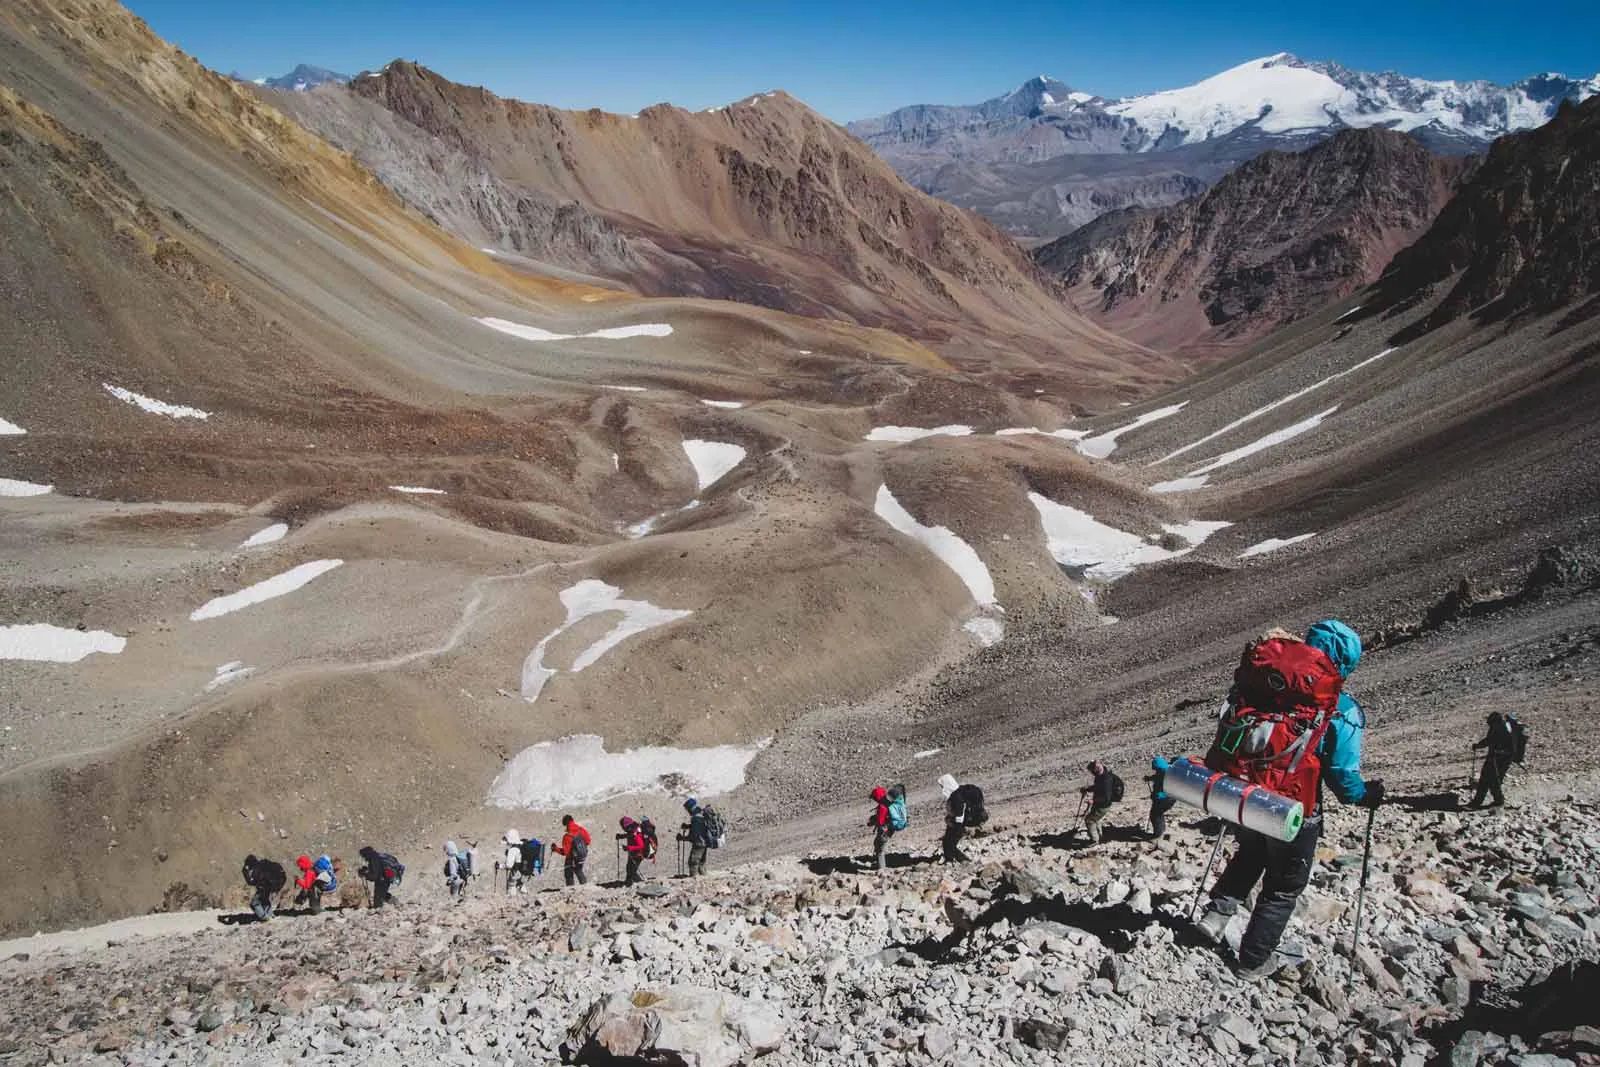 Hikers descending from the Portillo Argentino Pass in Argentina